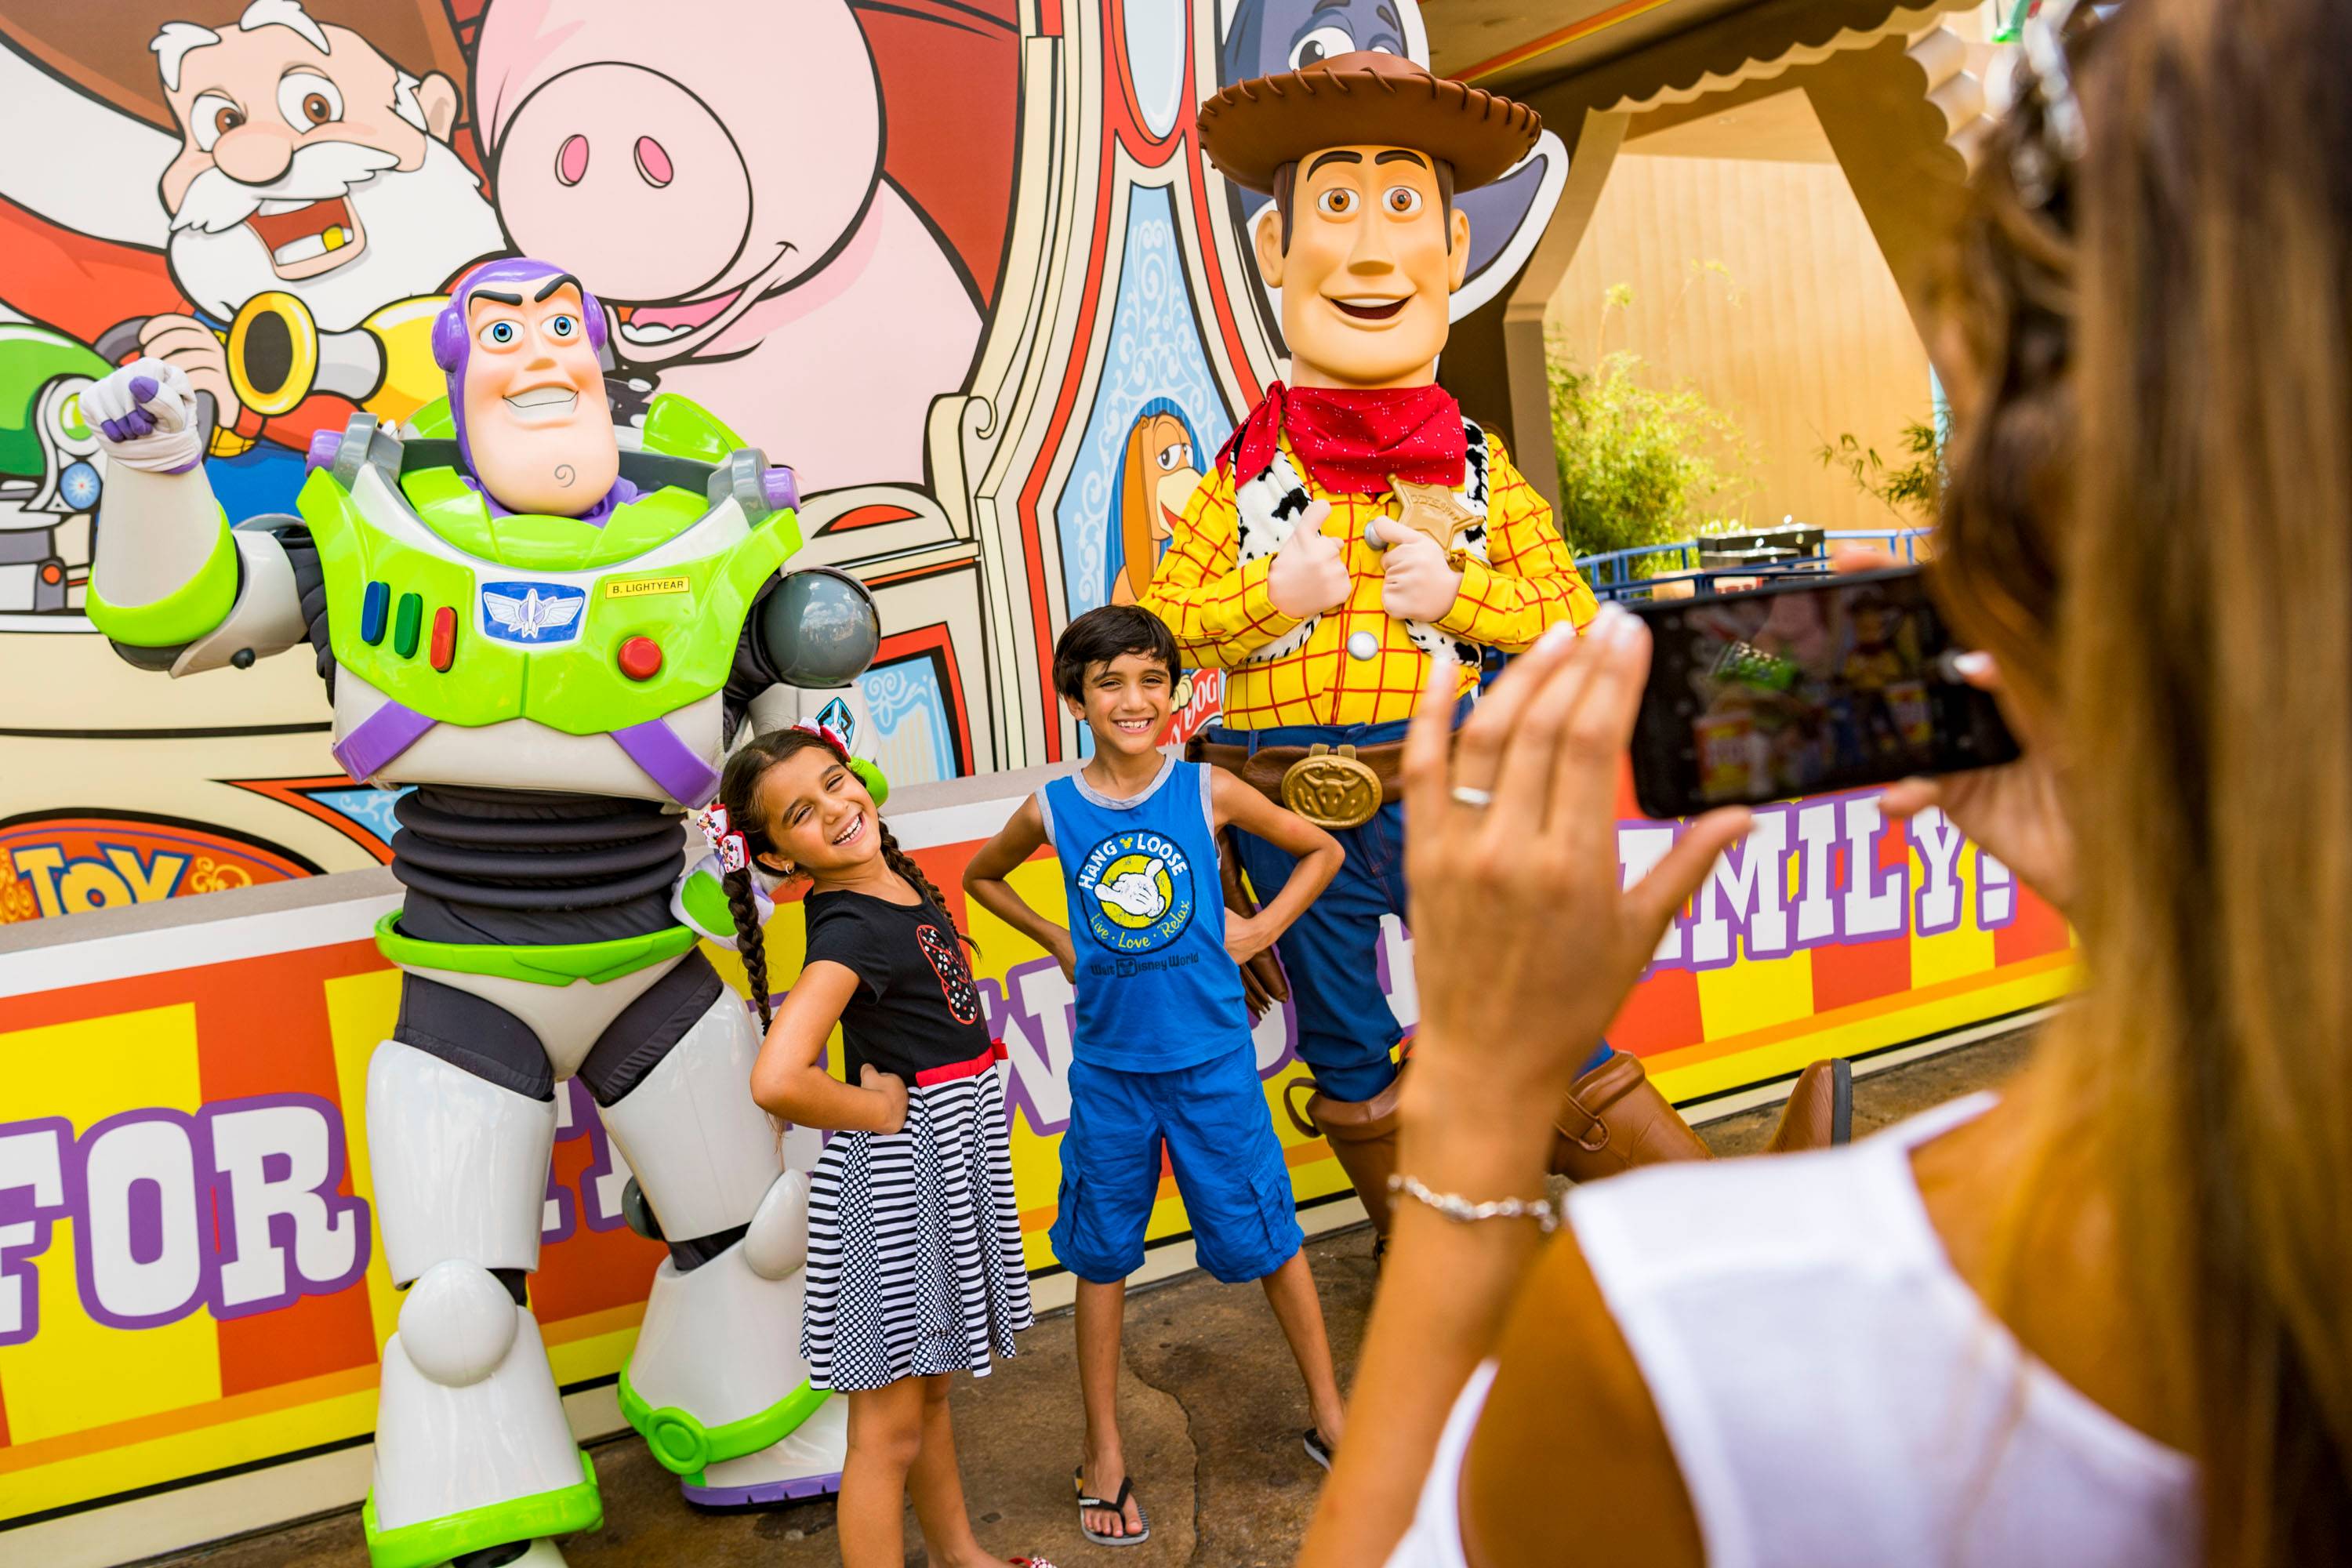 Toy Story Land preview tour